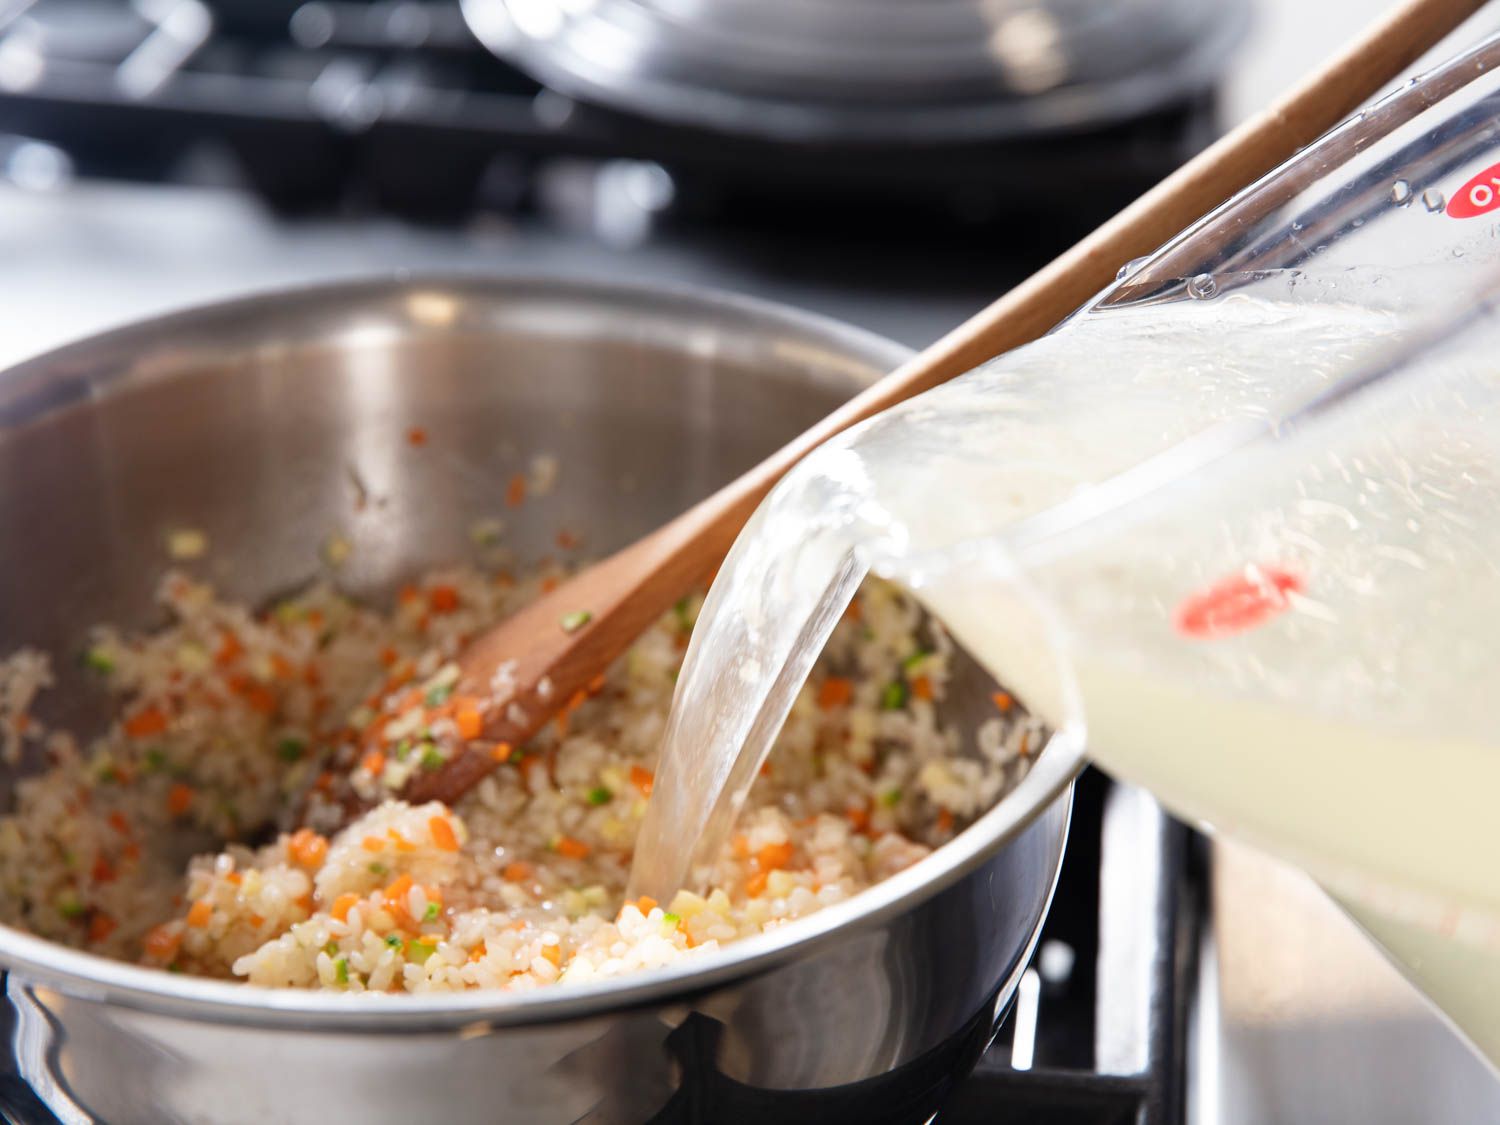 Pouring stock into a pot of rice and minced vegetables for juk